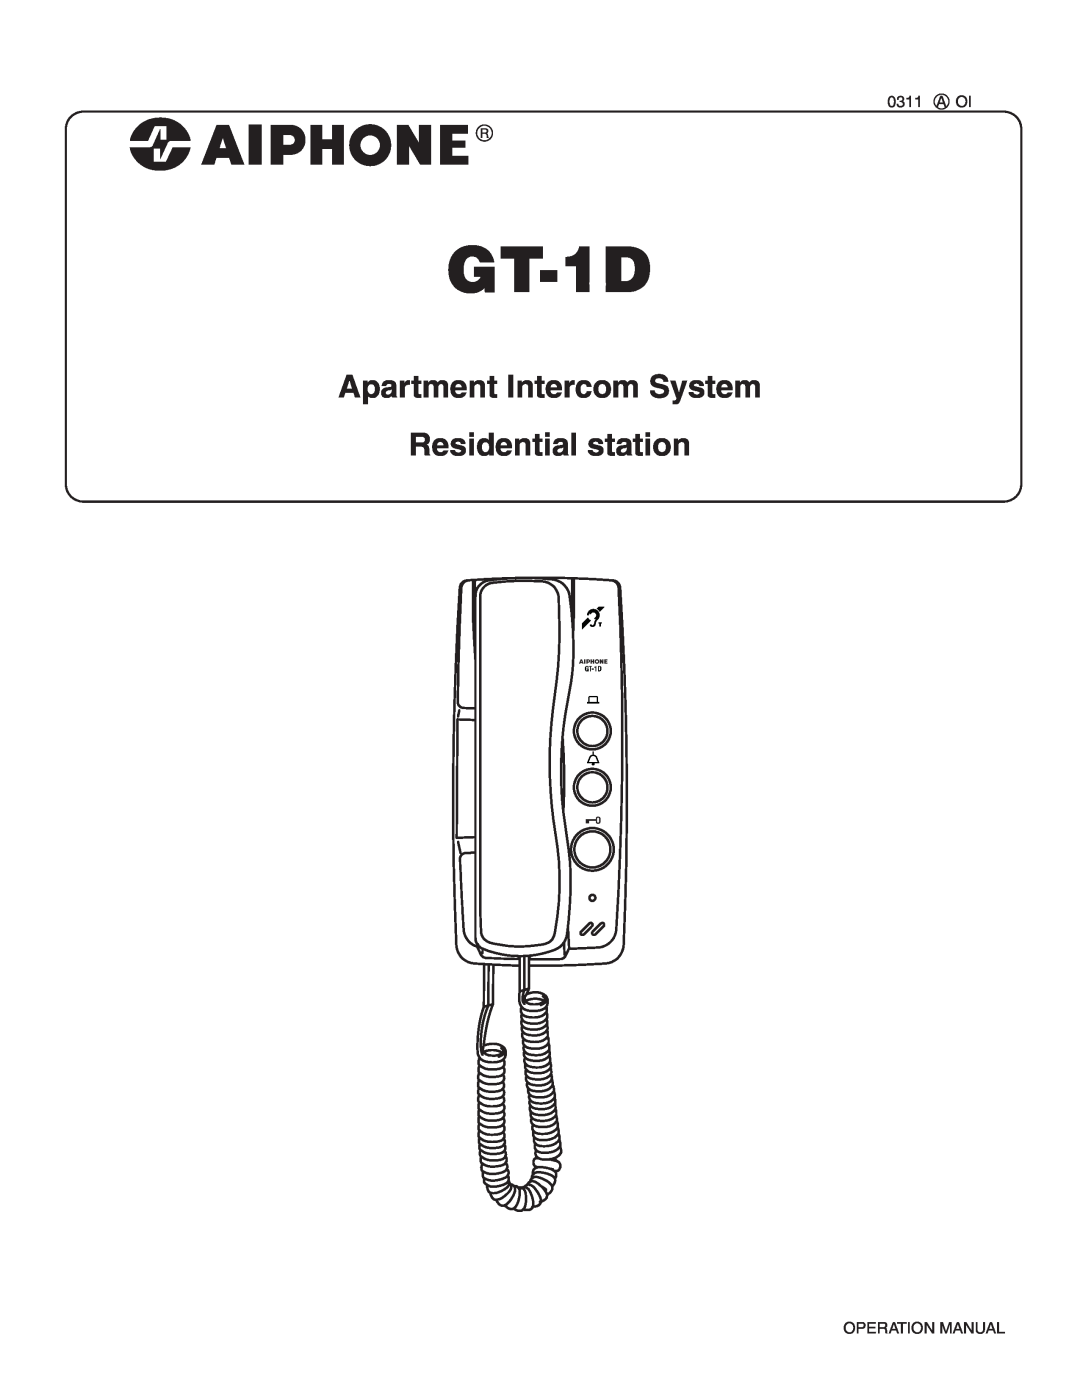 Aiphone GT-1D service manual Apartment Intercom System Residential station, A Oi, Operation Manual 